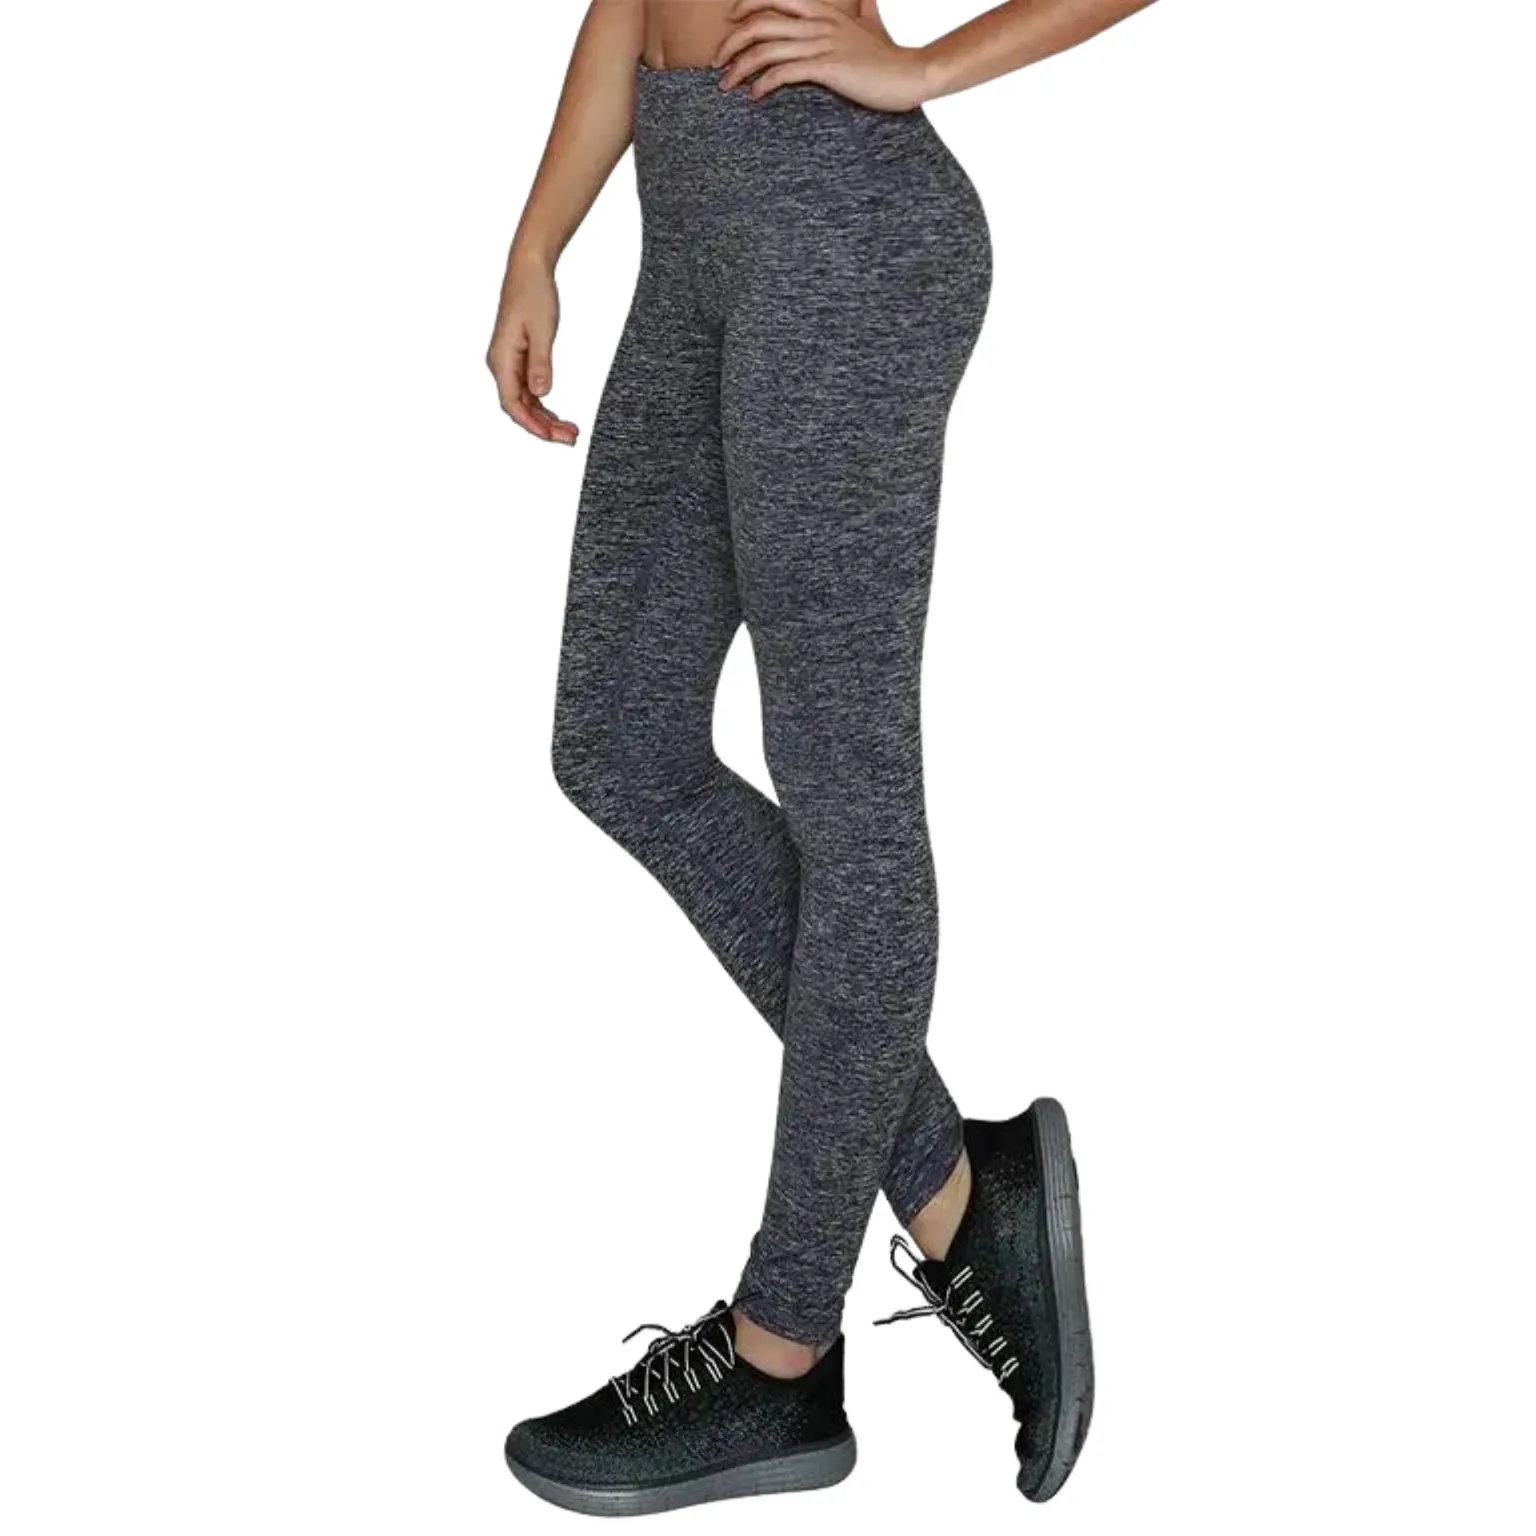 High Waisted Leggings manufacturing with trendy design